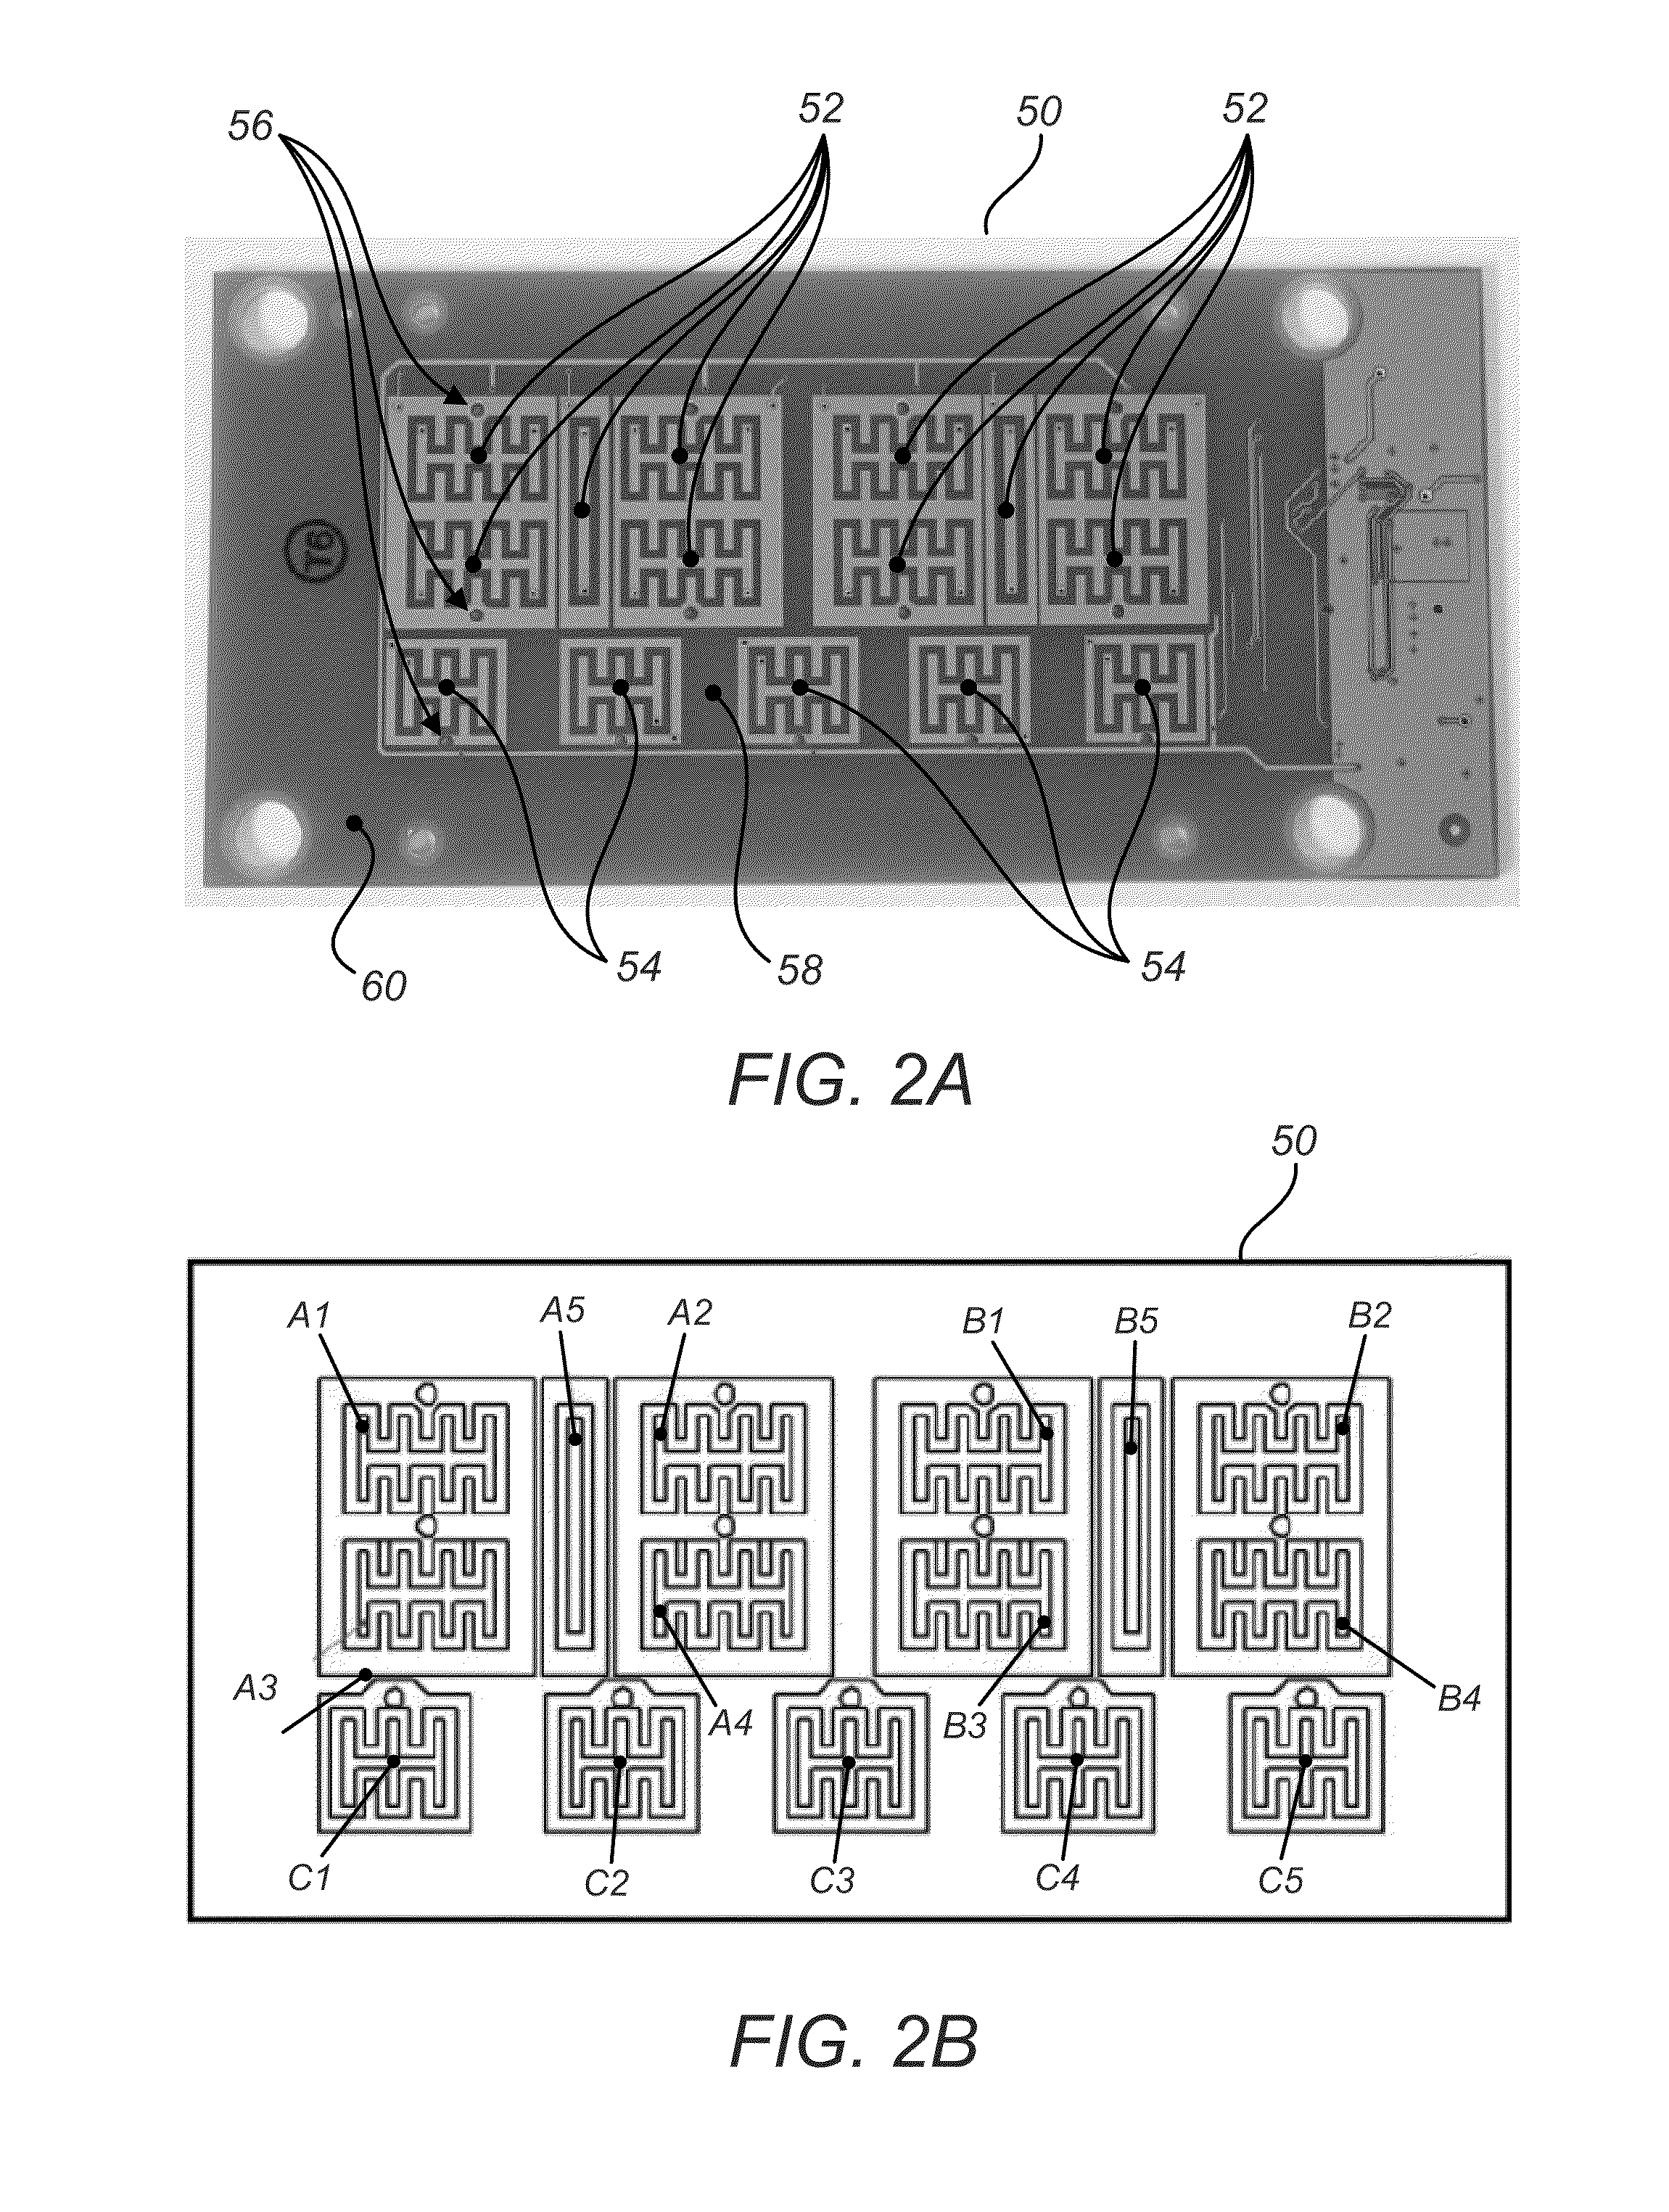 Touch Screen Interface for a Beverage Dispensing Machine